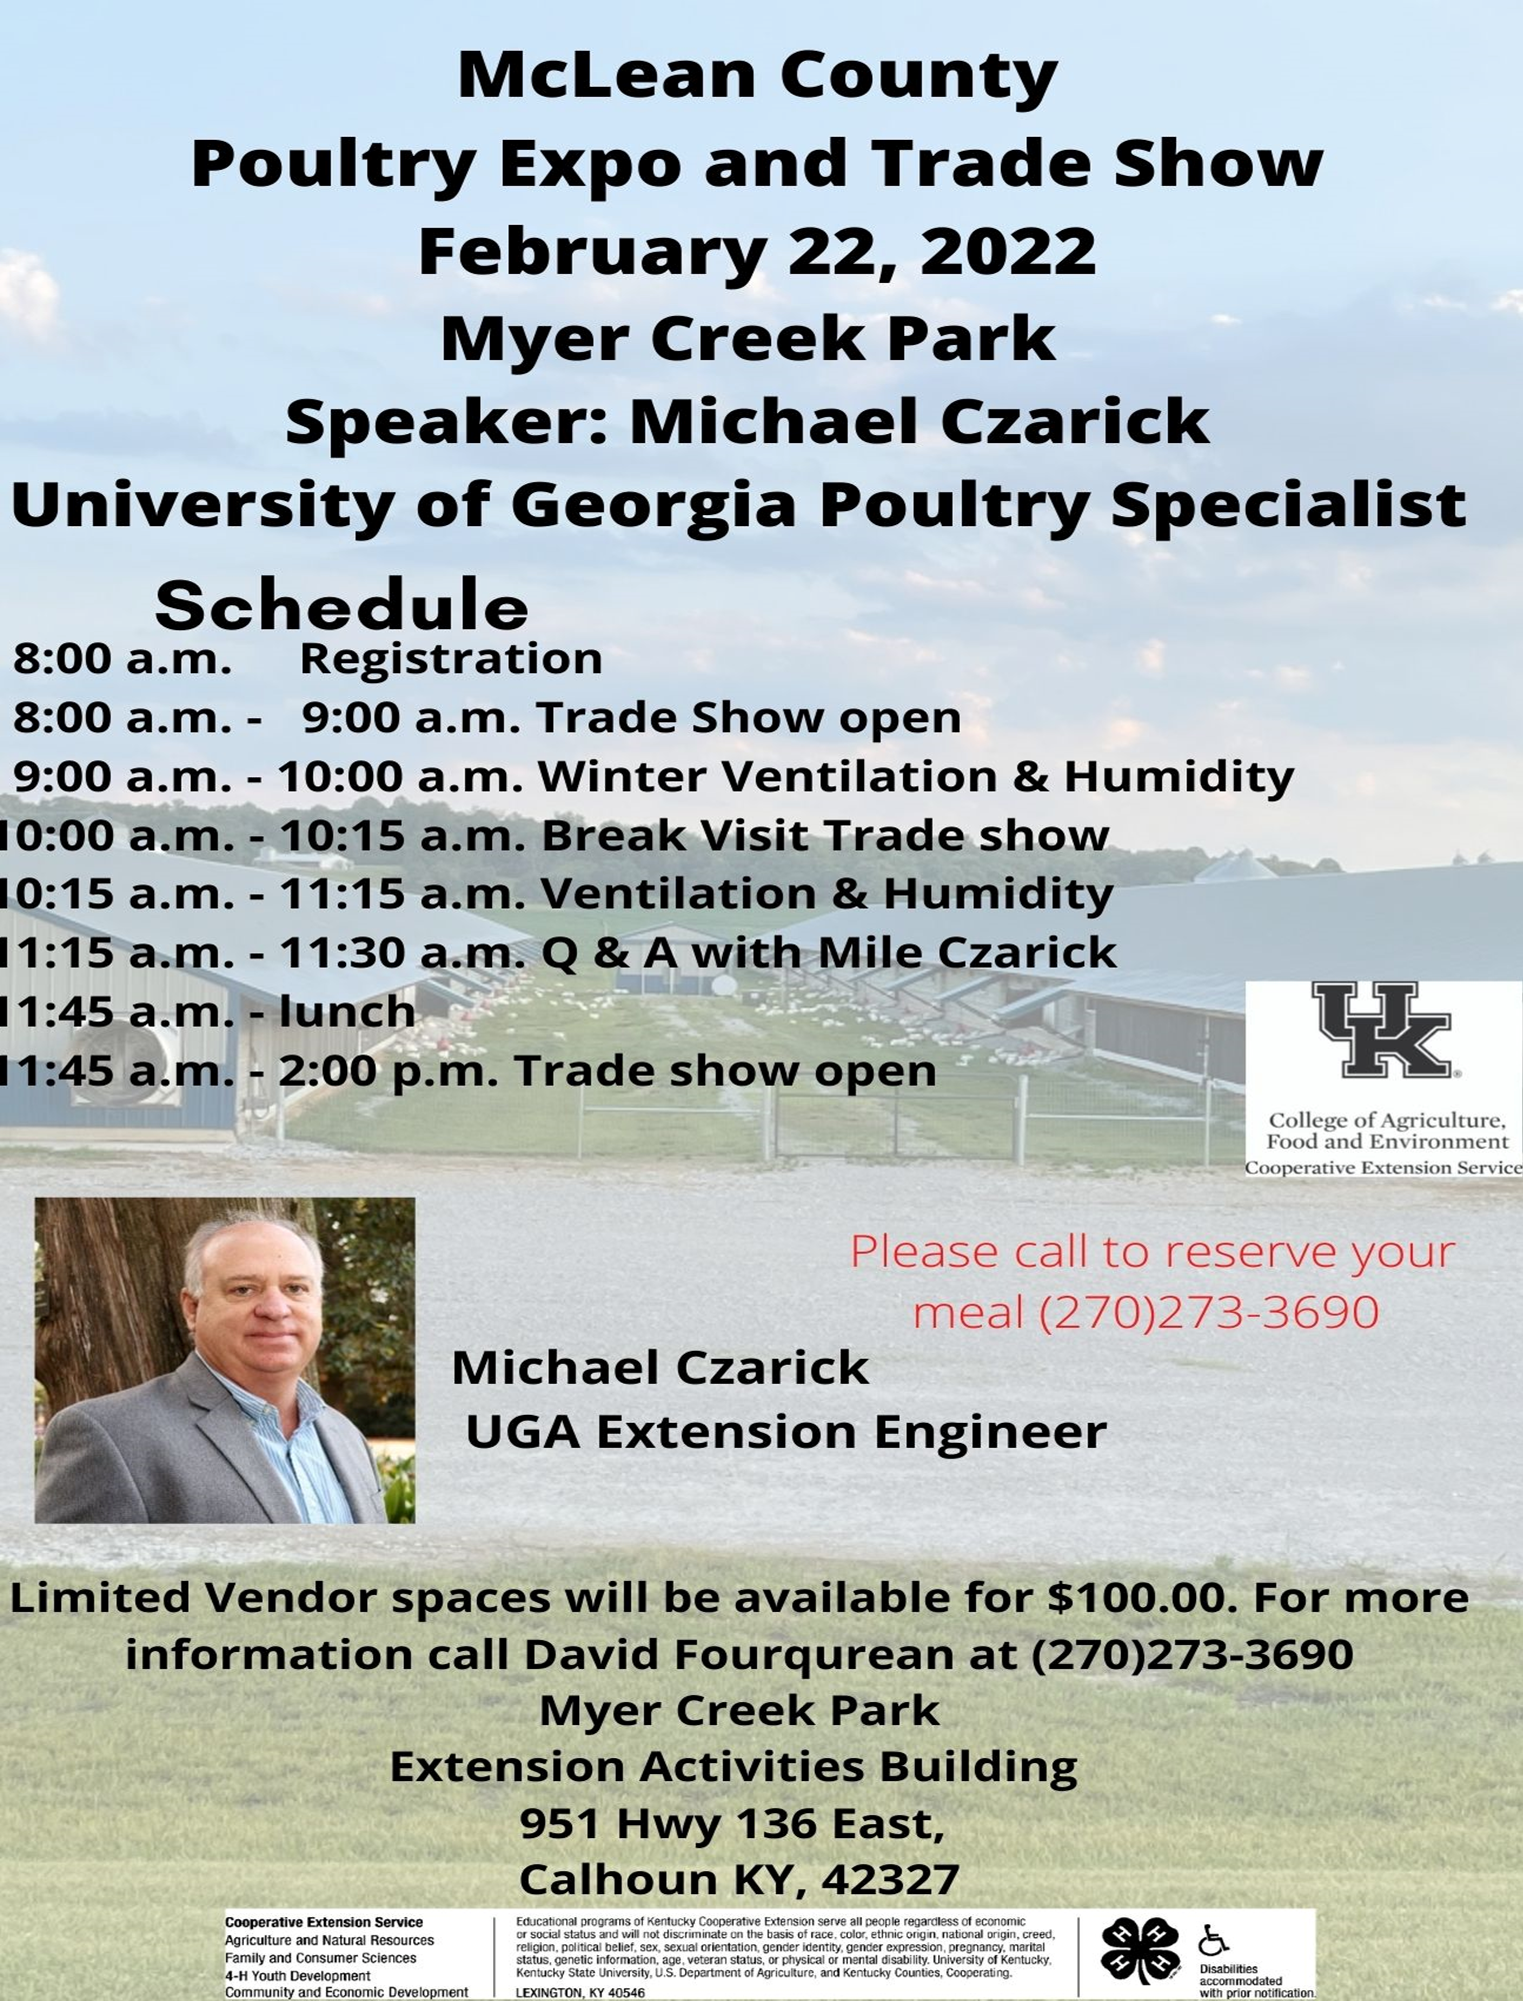 McLean County Poultry Expo Flyer